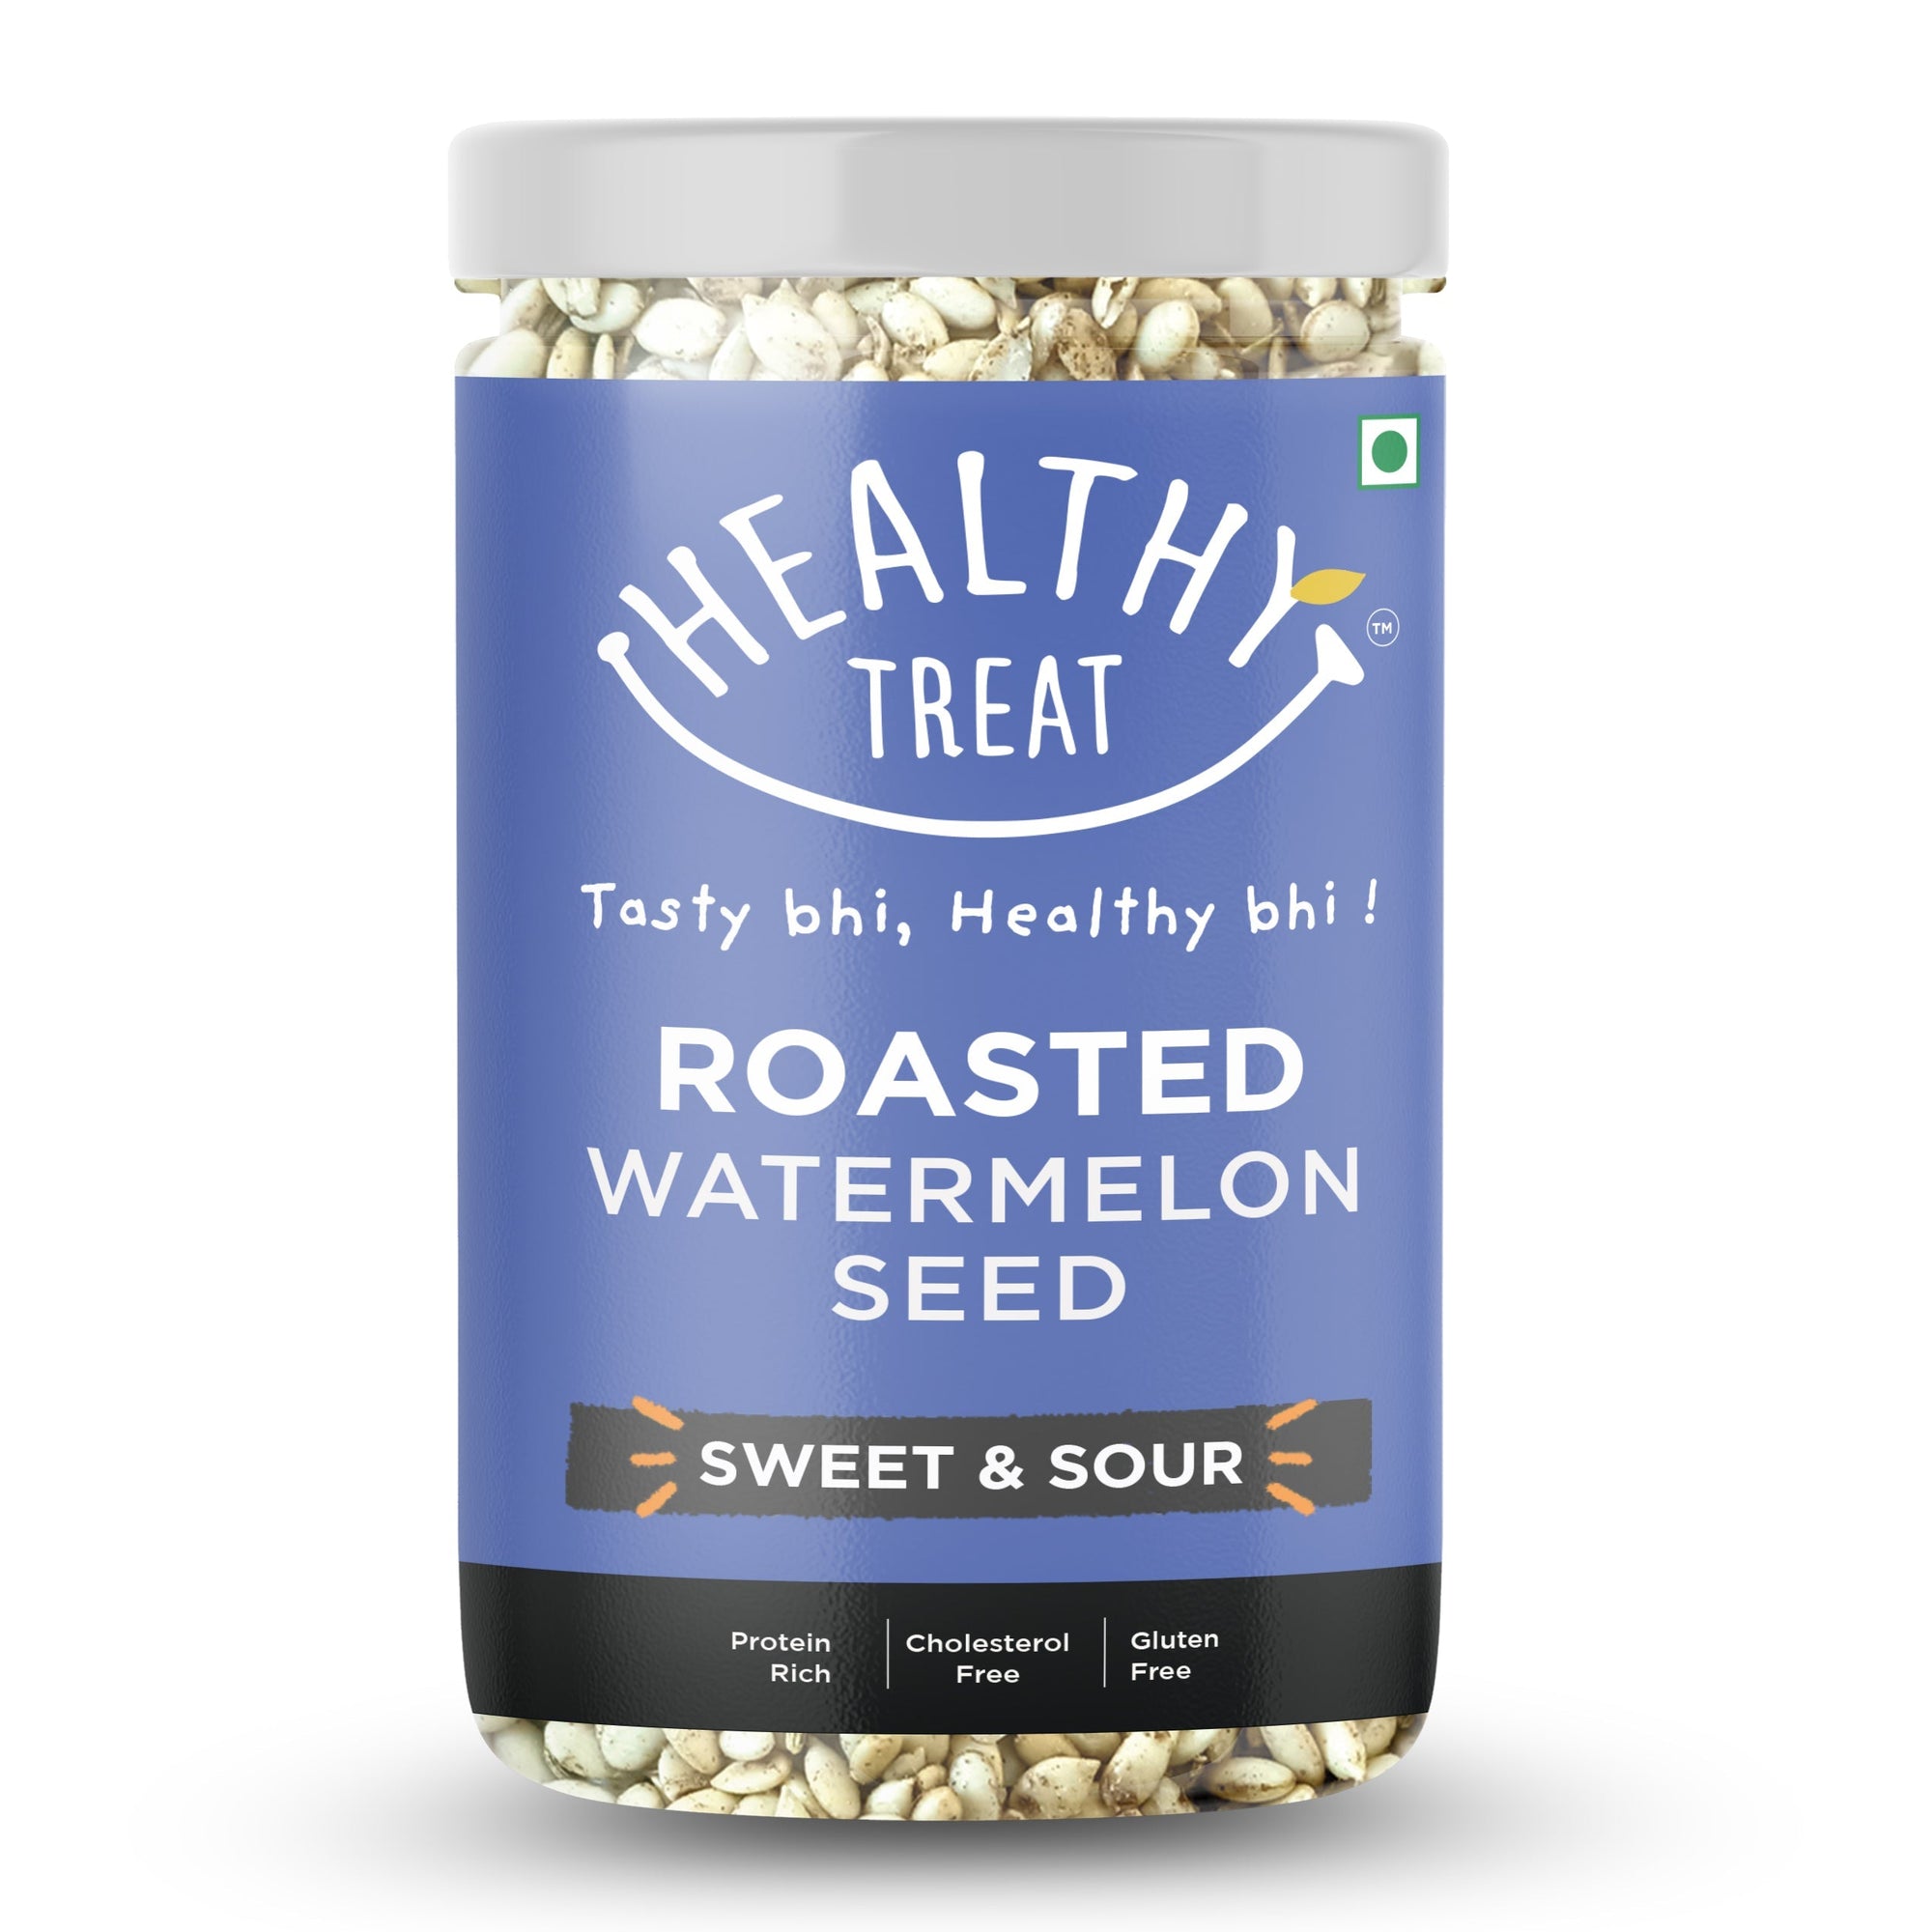 Roasted Watermelon Seed - Sweet & Sour 80g